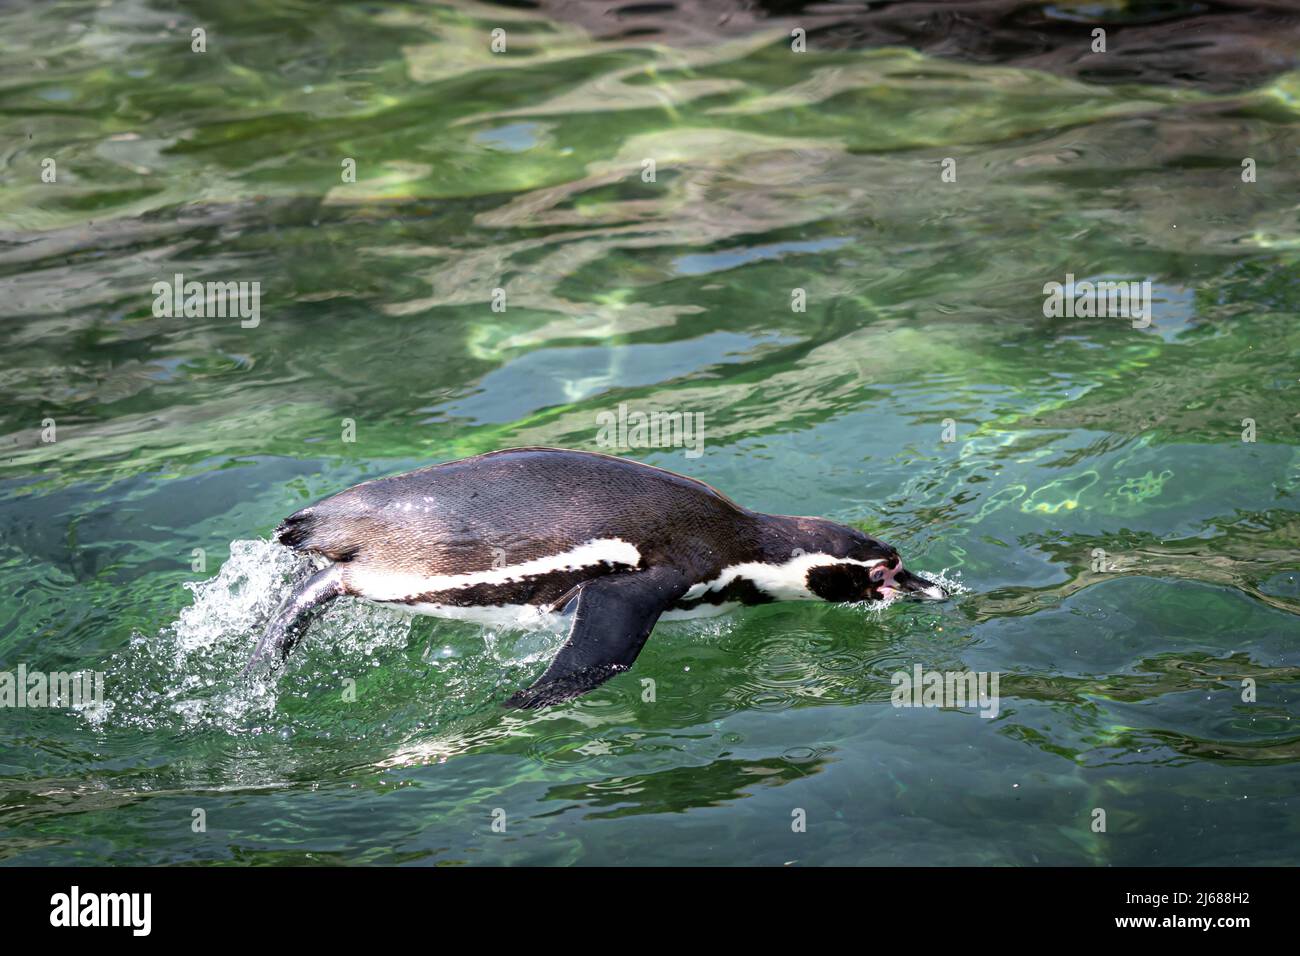 a pinguine jumping out of the water while swimming Stock Photo